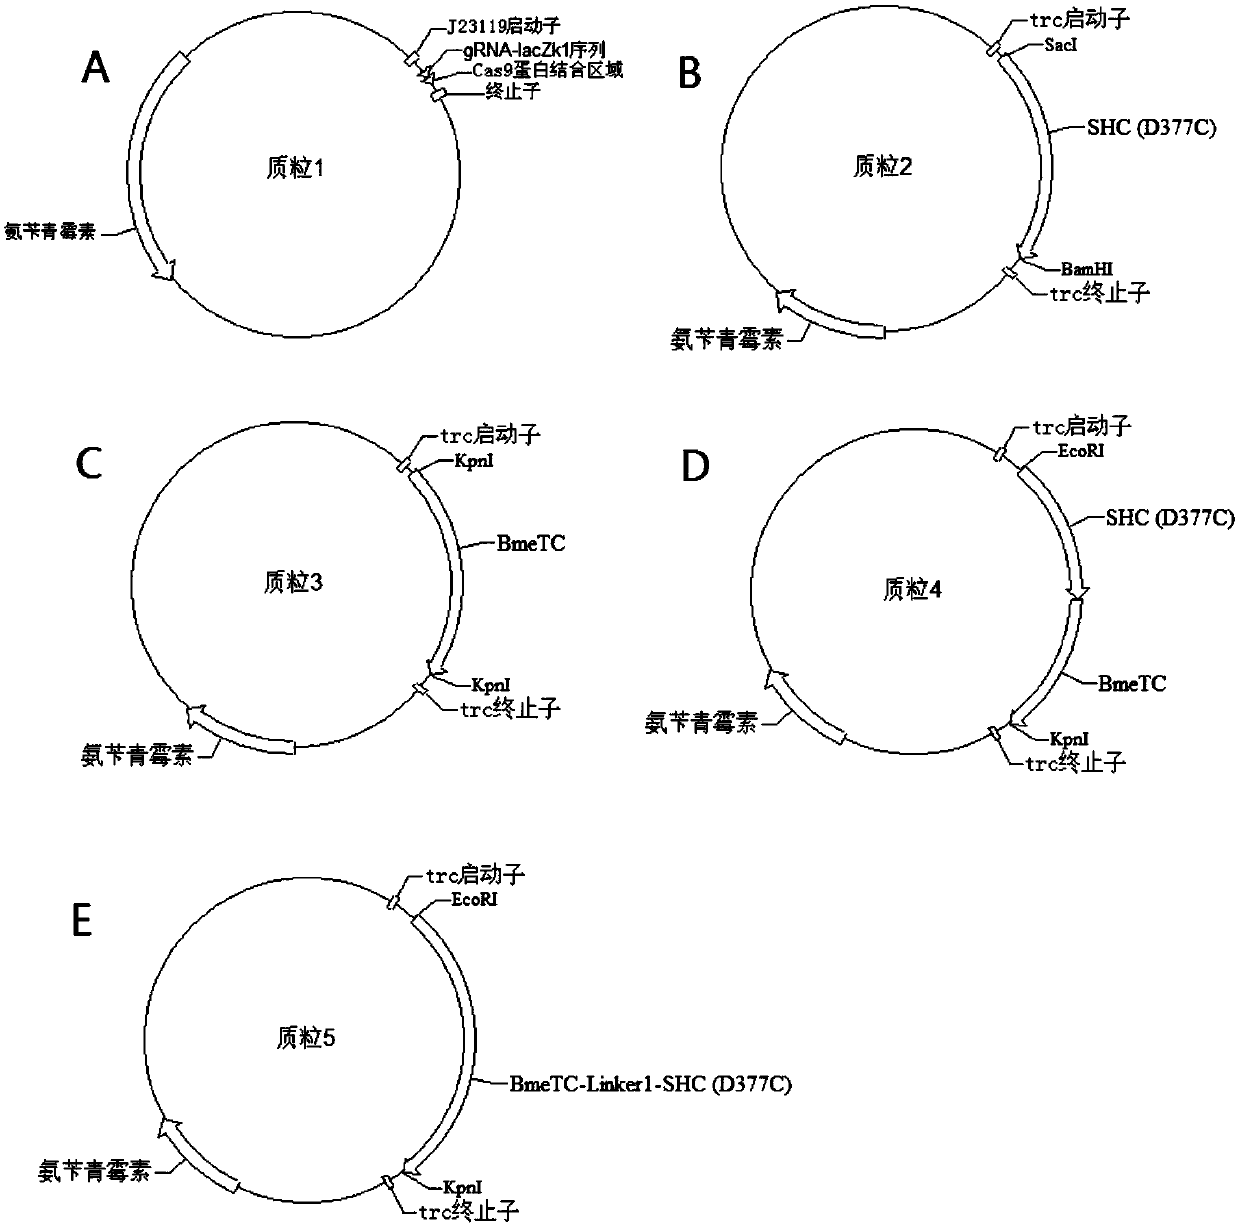 Recombinant escherichia coli for heterologously synthesizing ambrein and construction method thereof